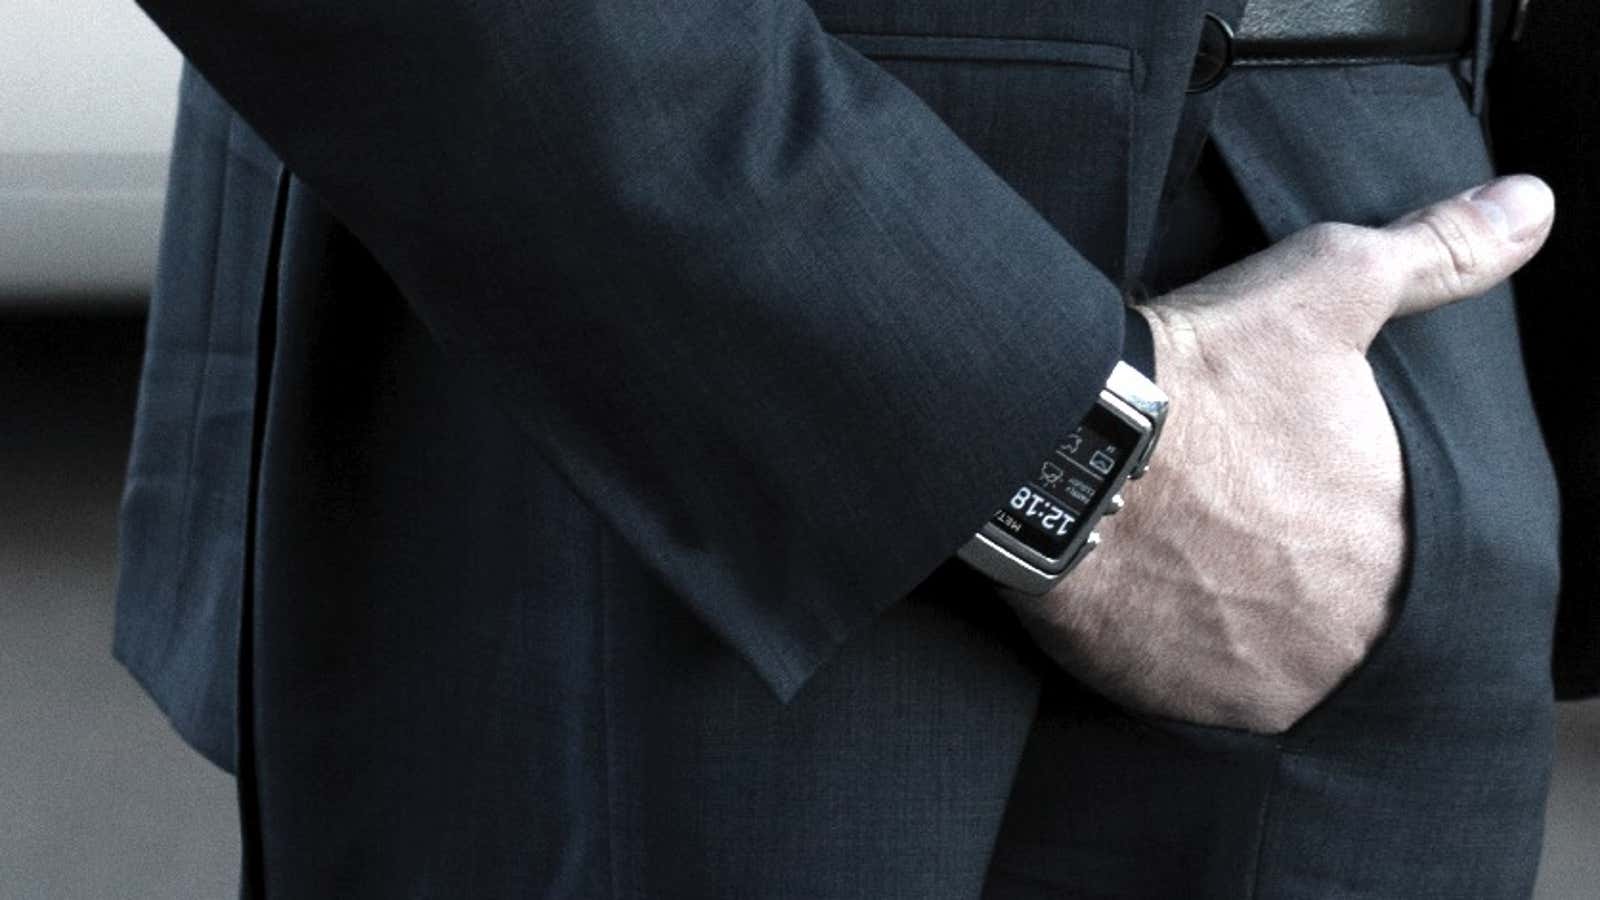 A former Fossil executive and a former Nokia designer think they’ve cracked the code for luxury smartwatches.